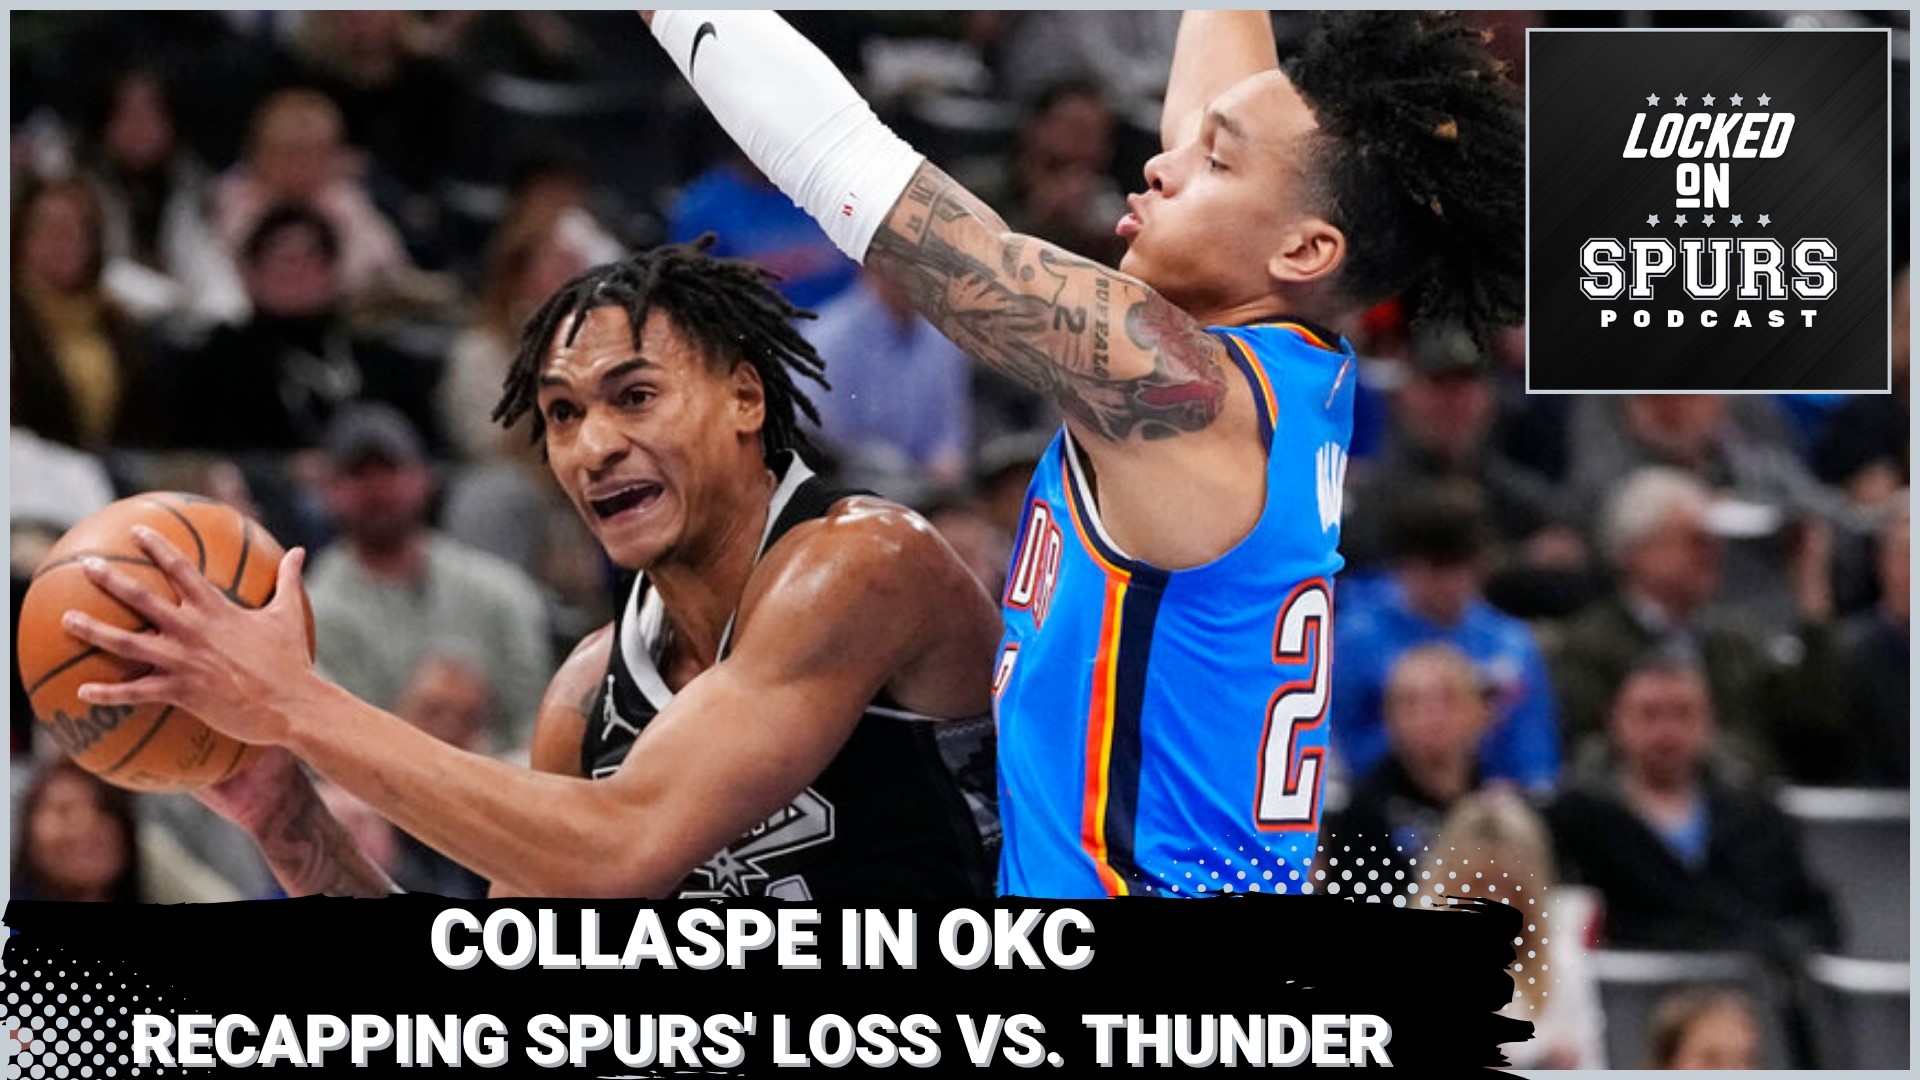 The Spurs had a second half collapse versus the Thunder.